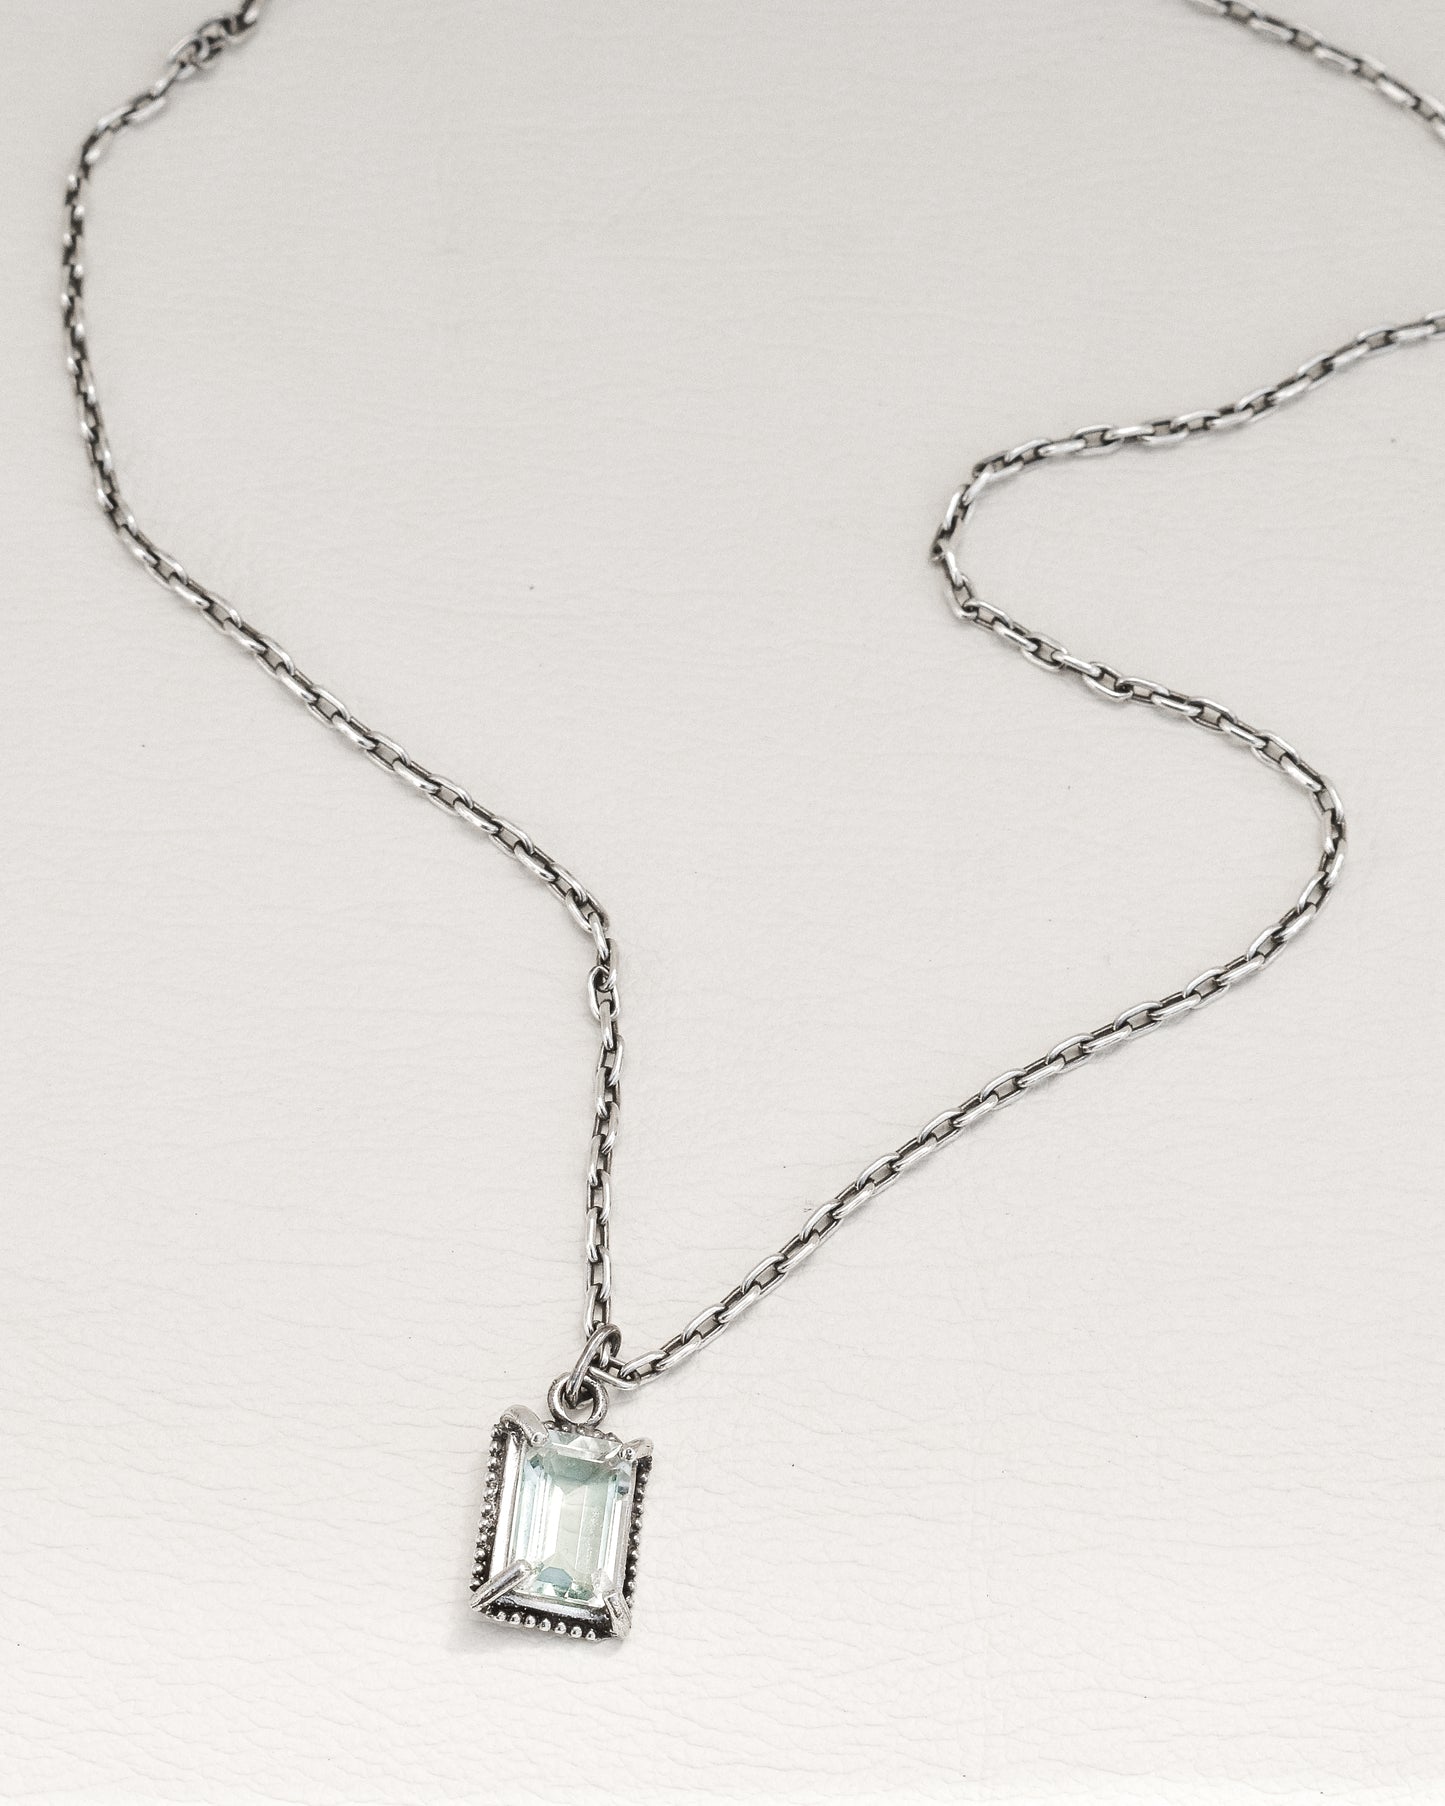 The Limited Edition Green Amethyst Haze Necklace